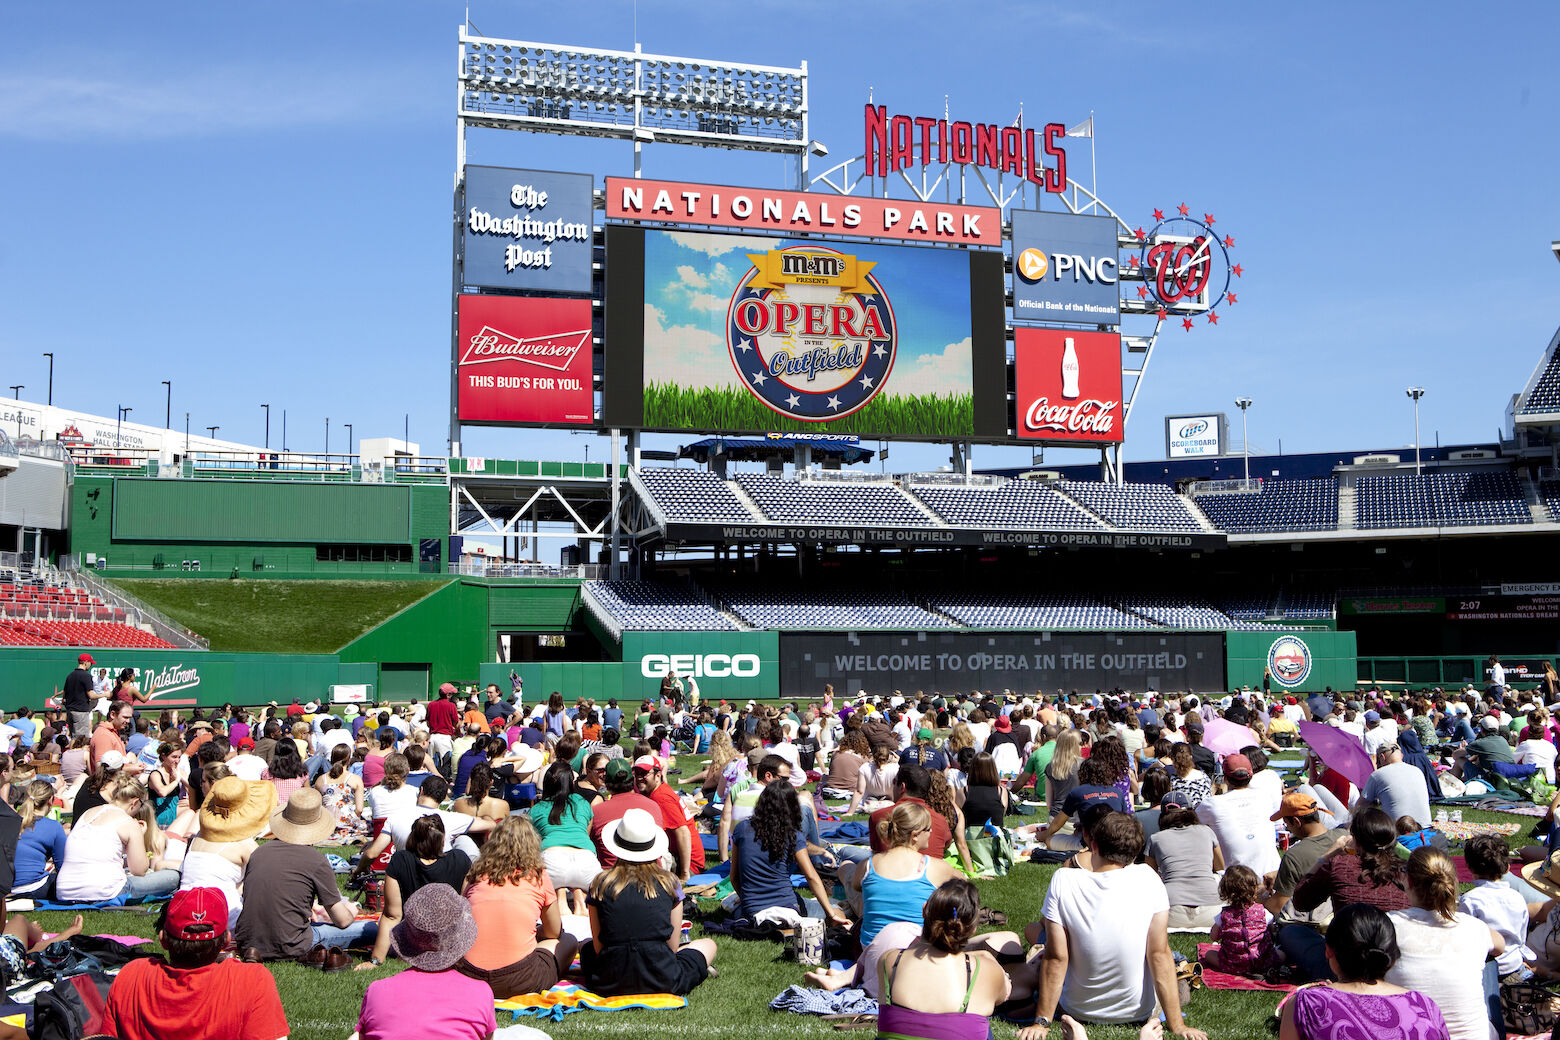 Take me out to the … opera? Nats Park hosts free Opera in the Outfield